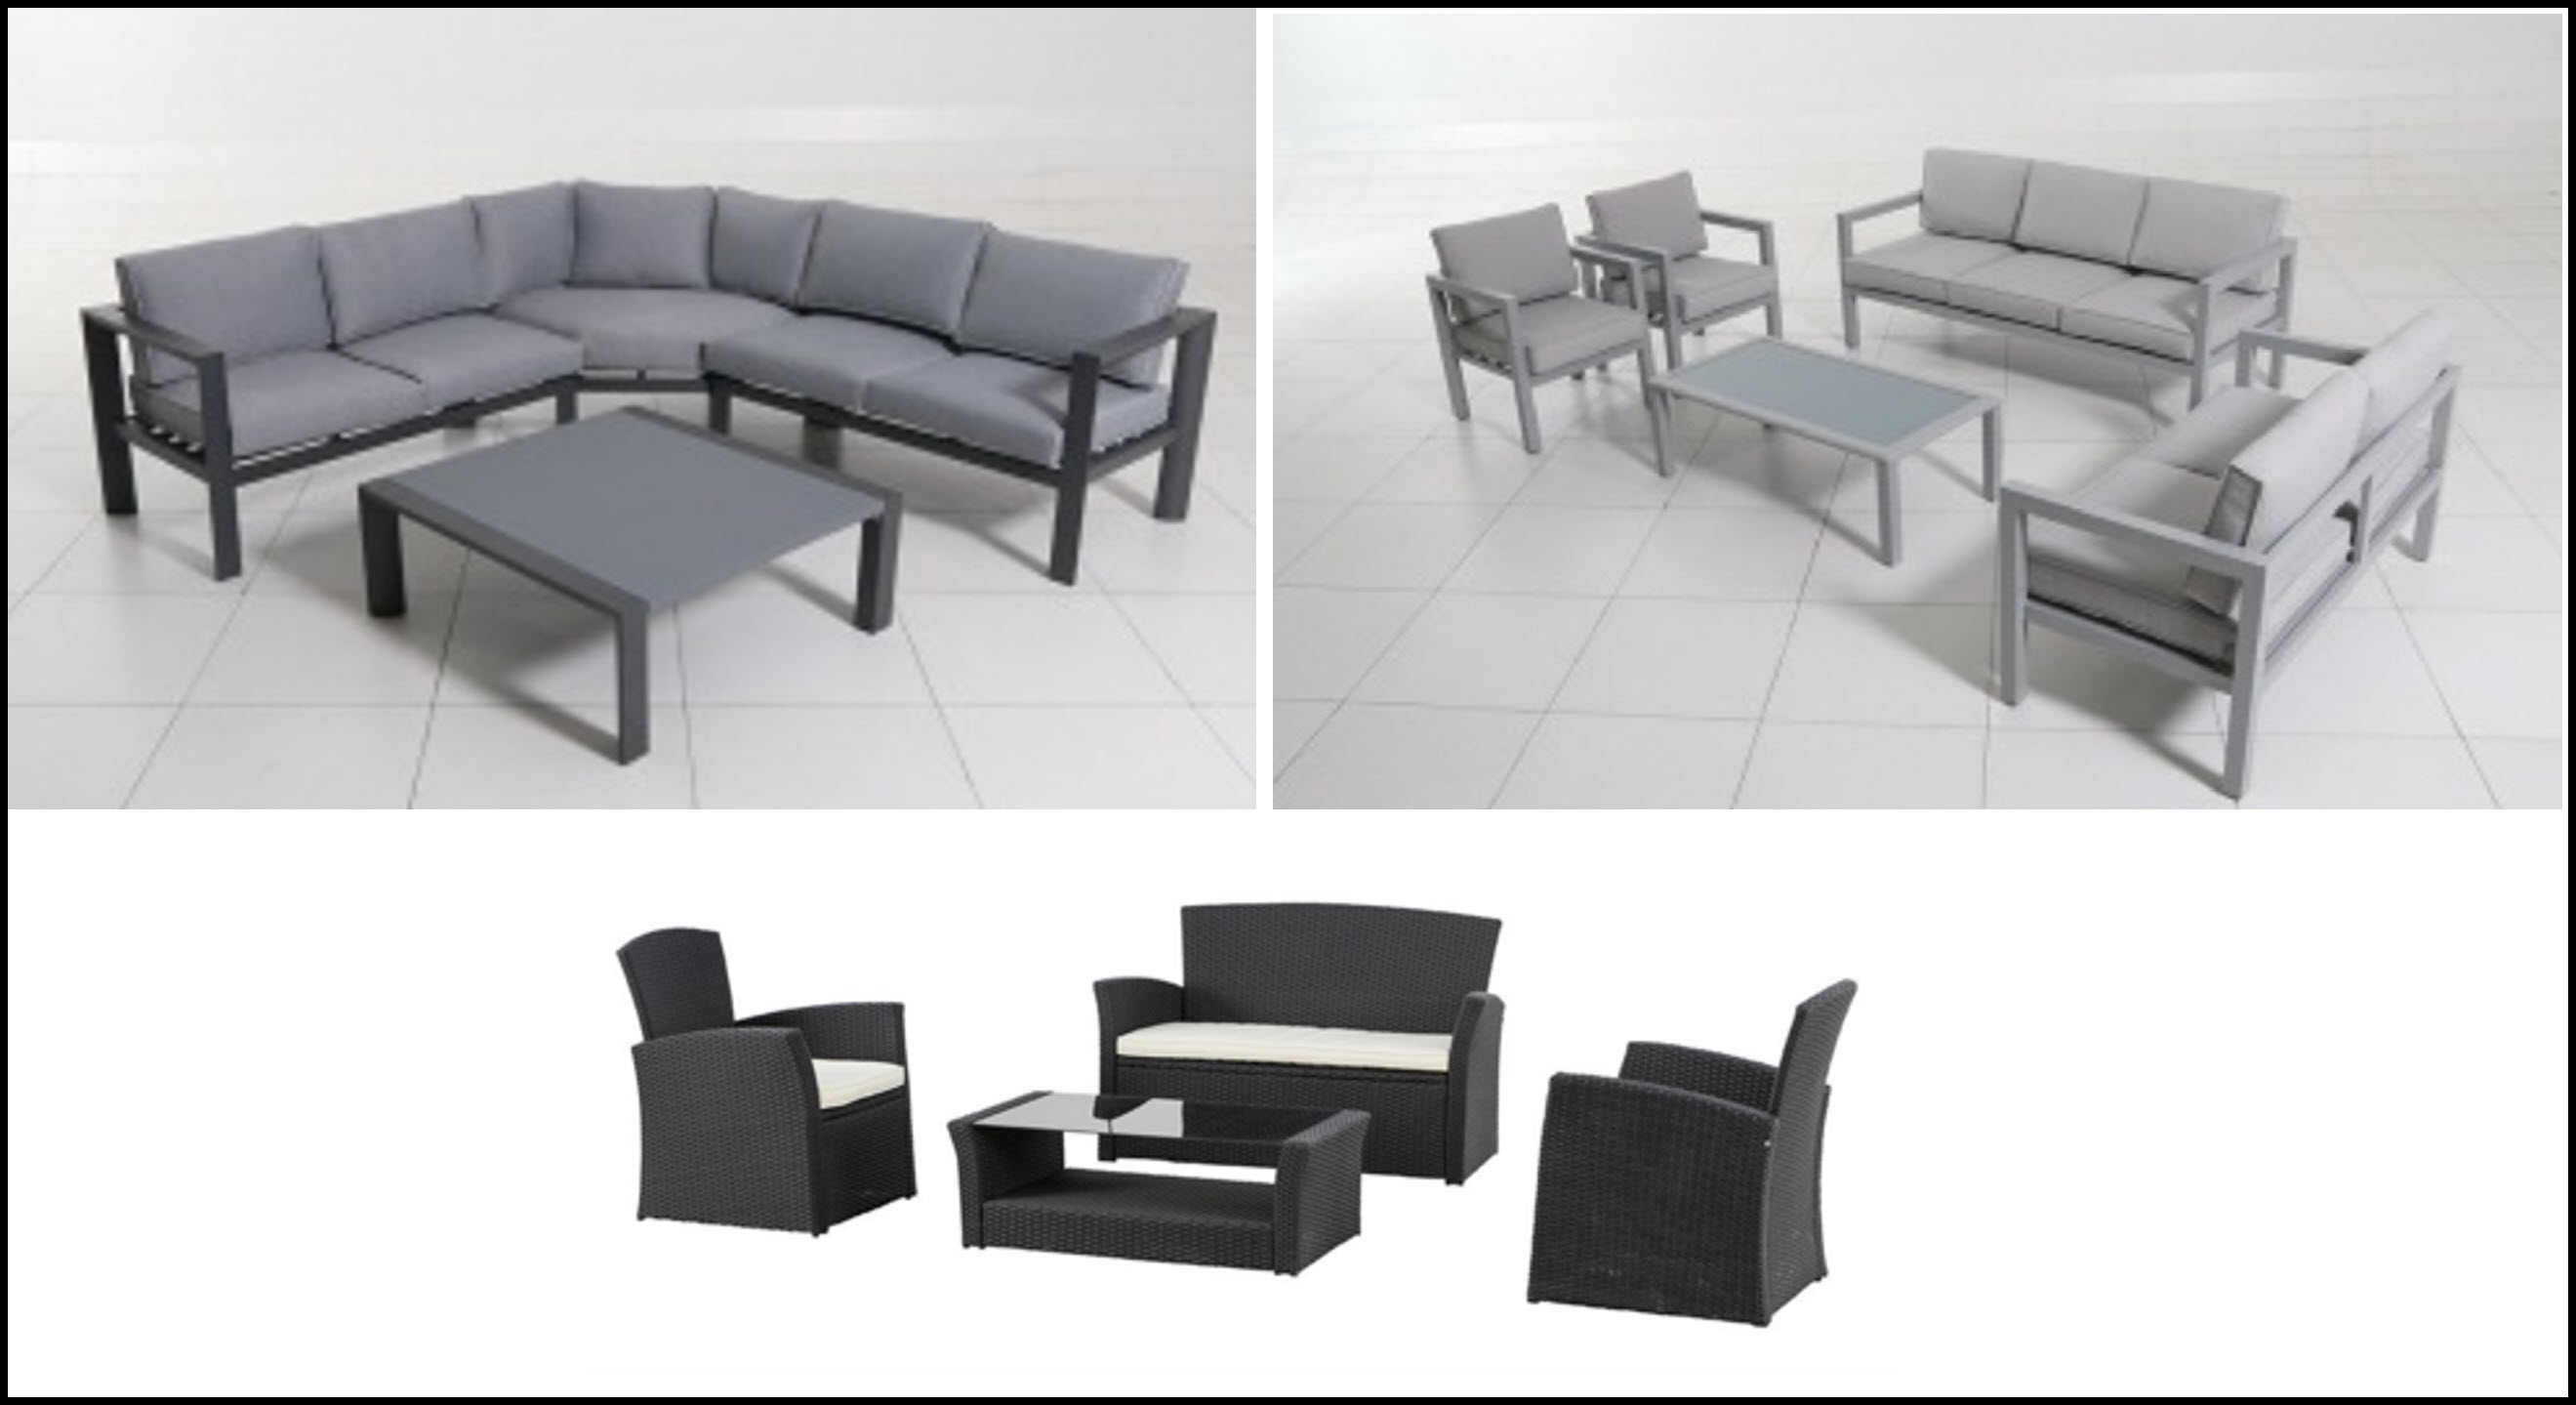 Frequently found defects for Sofa set